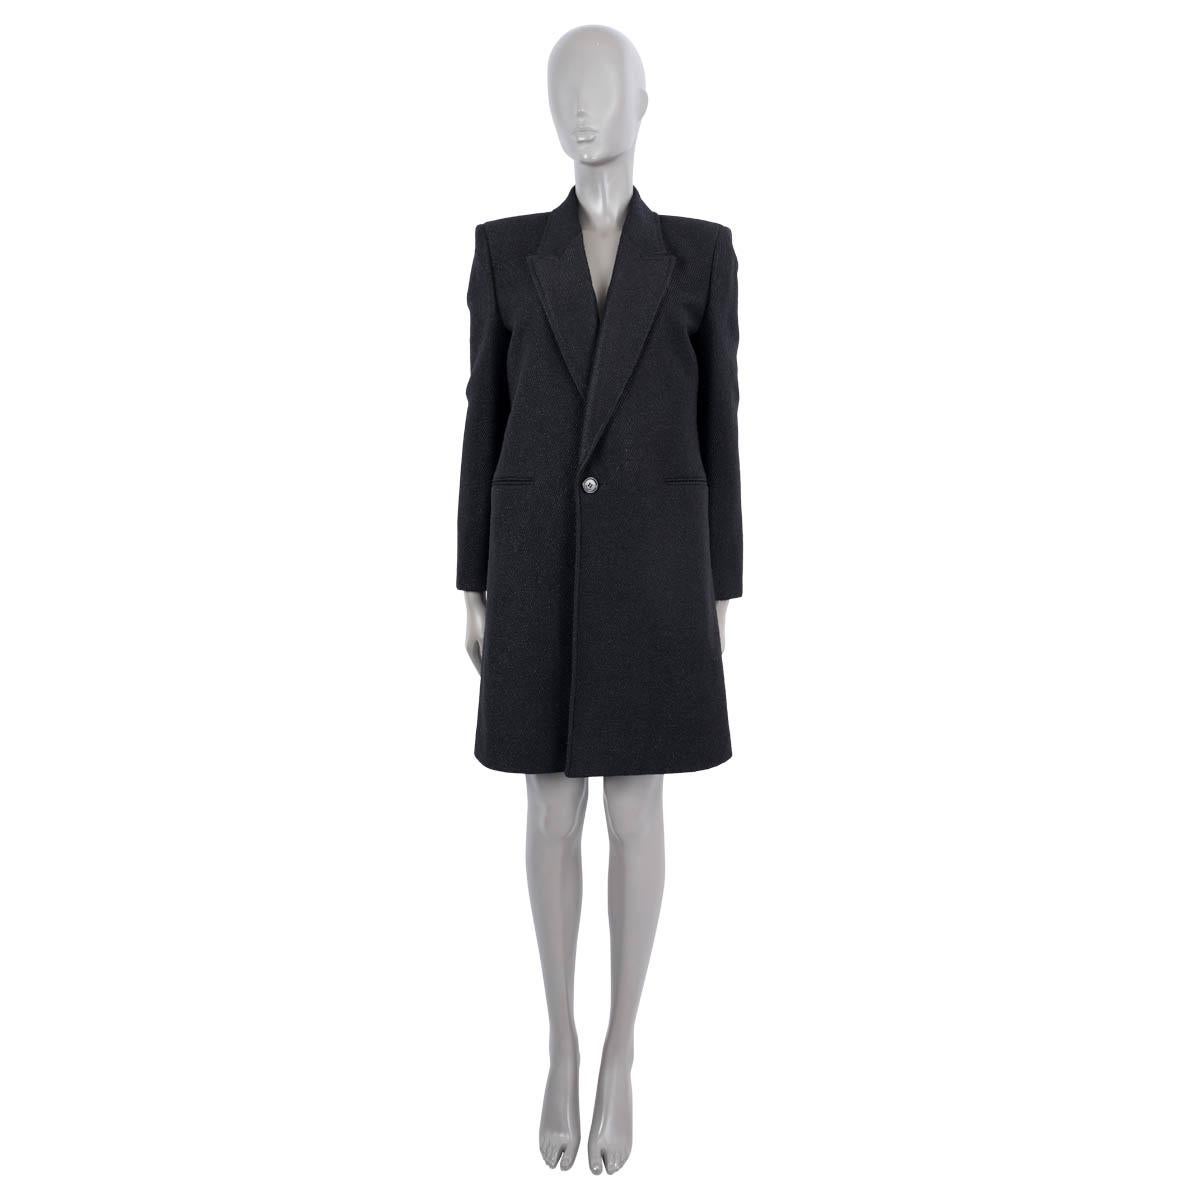 100% authentic Saint Laurent single breasted coat in black wool (59%), polyamide (22%), acetate (18%), polyester (2%) and elastane (2%). Features two slit-pockets on the front, buttoned cuffs and slit in the back. Closes with one button on the